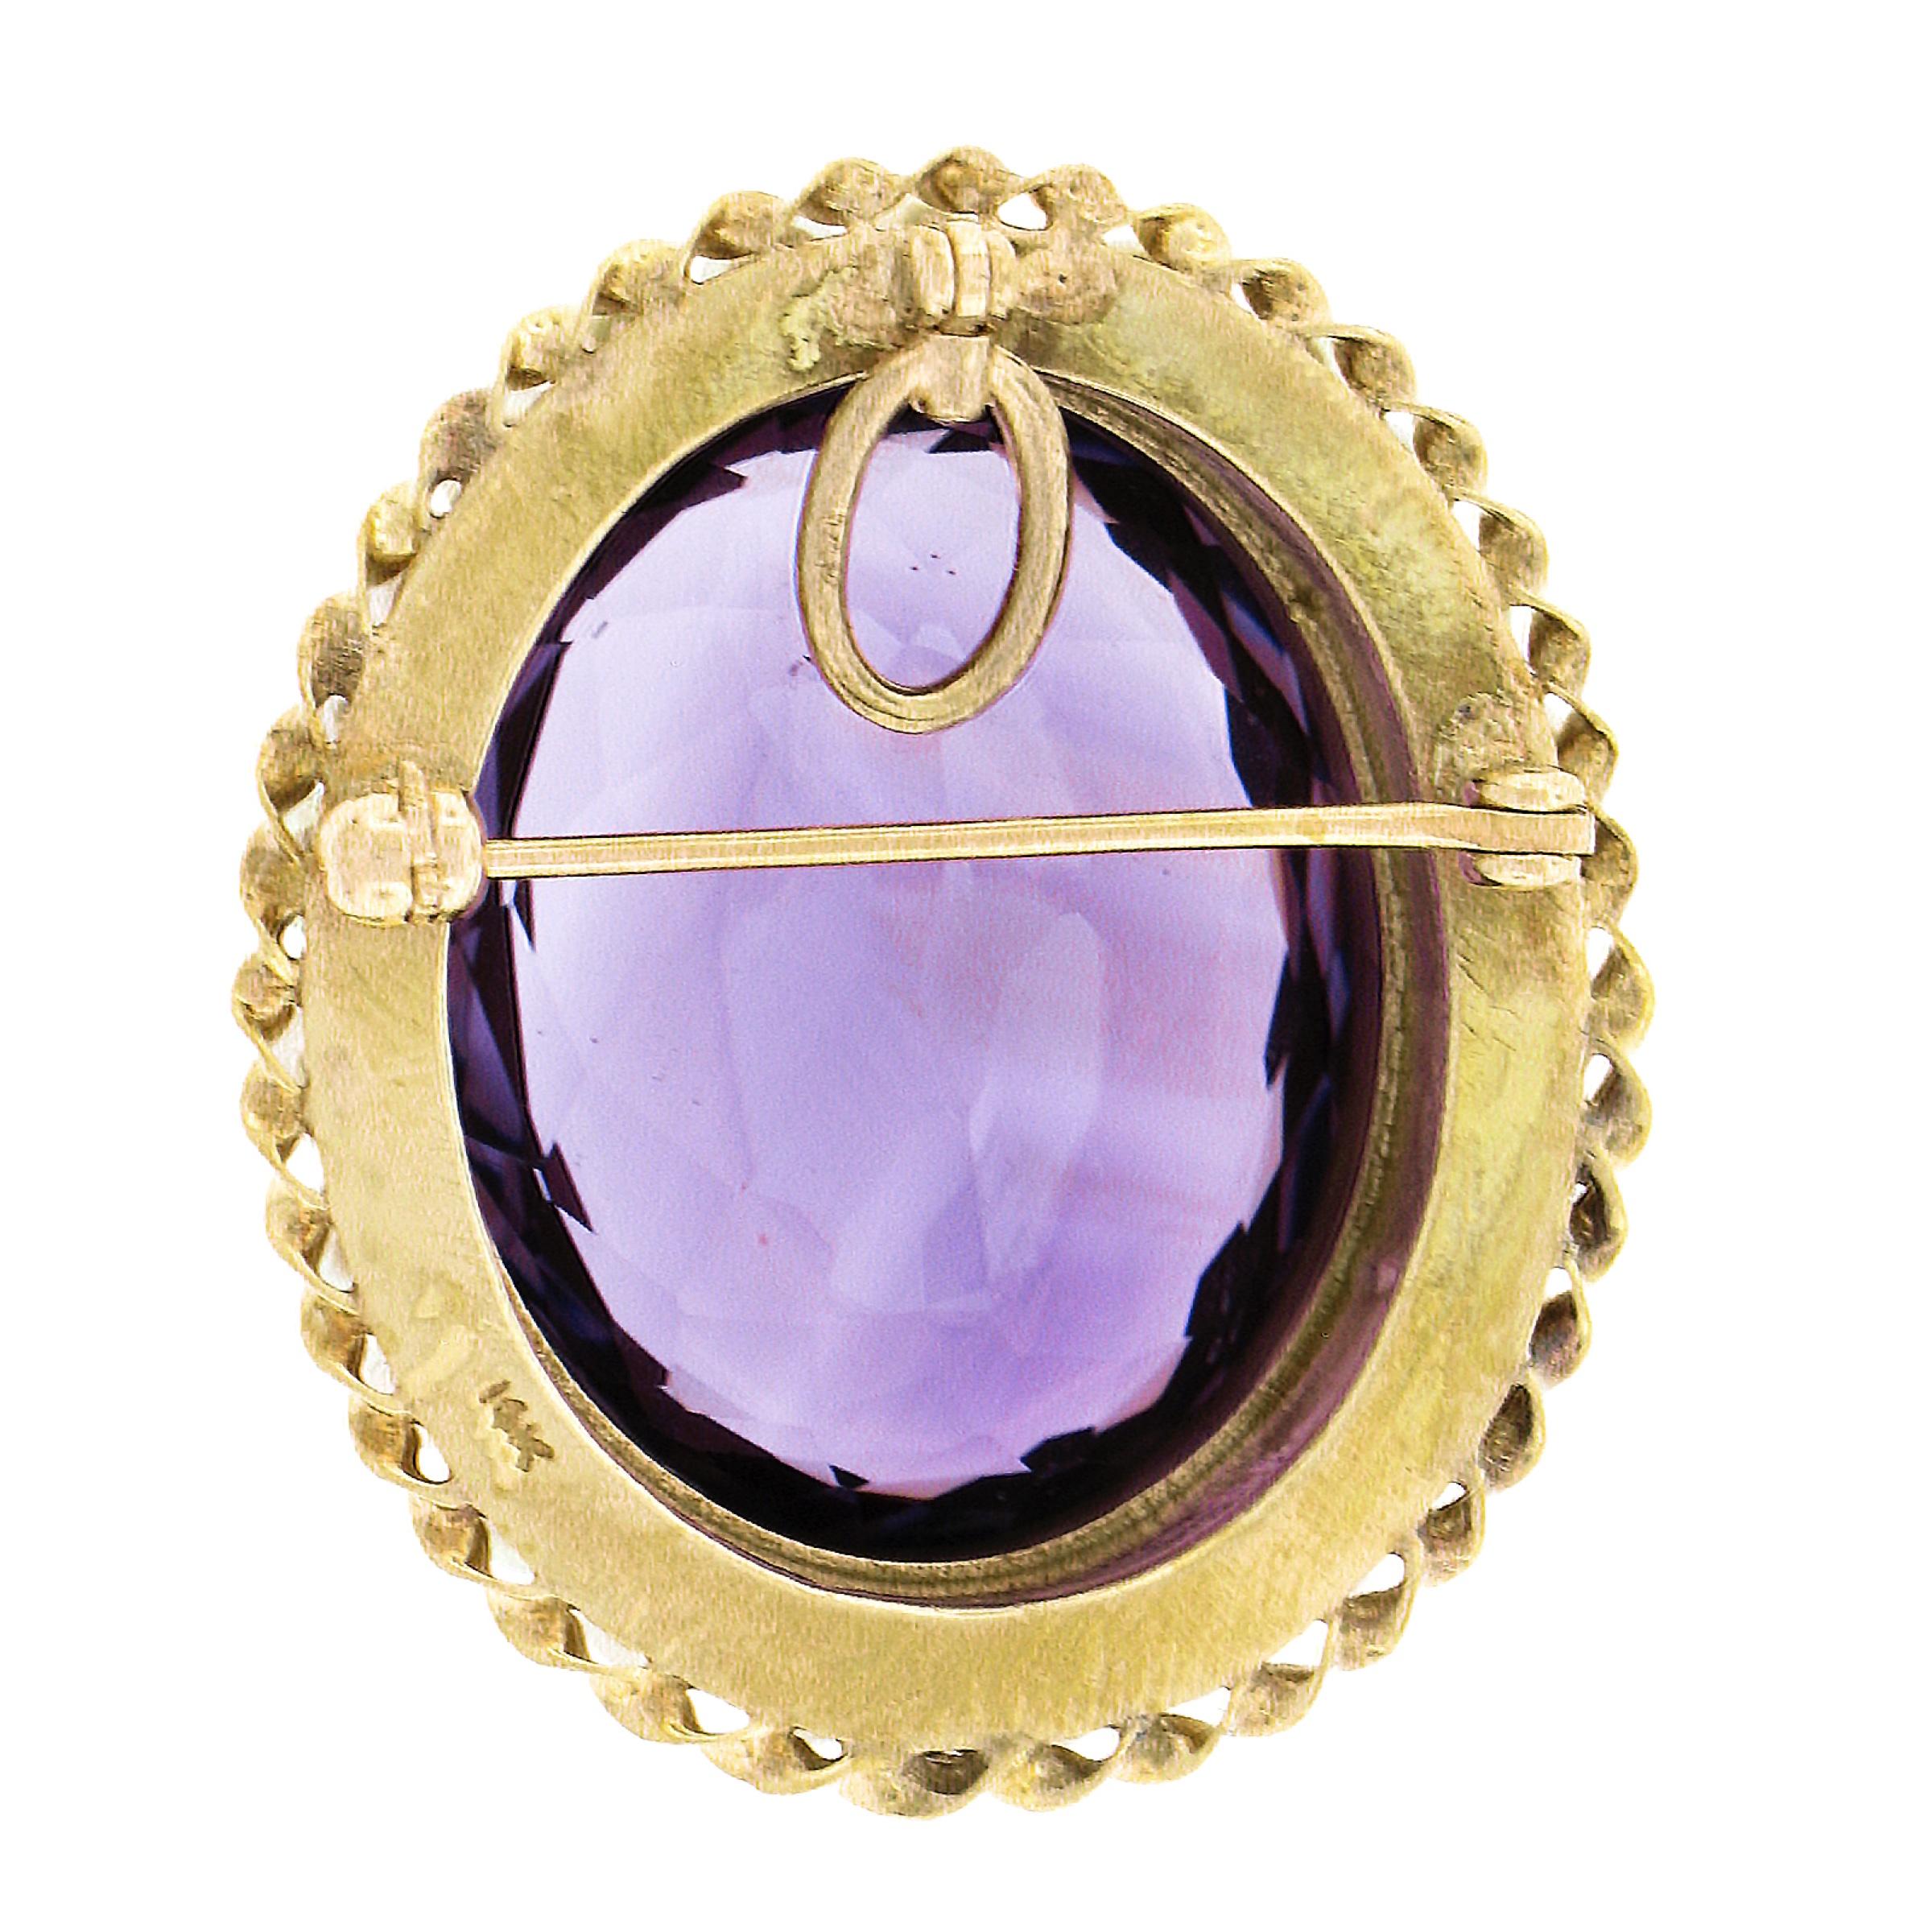 Here we have an absolutely beautiful and bold vintage brooch or pendant crafted from solid 14k yellow gold featuring a detailed Victorian Revival style design with a large, oval cut, natural amethyst stone neatly bezel set at the center of a